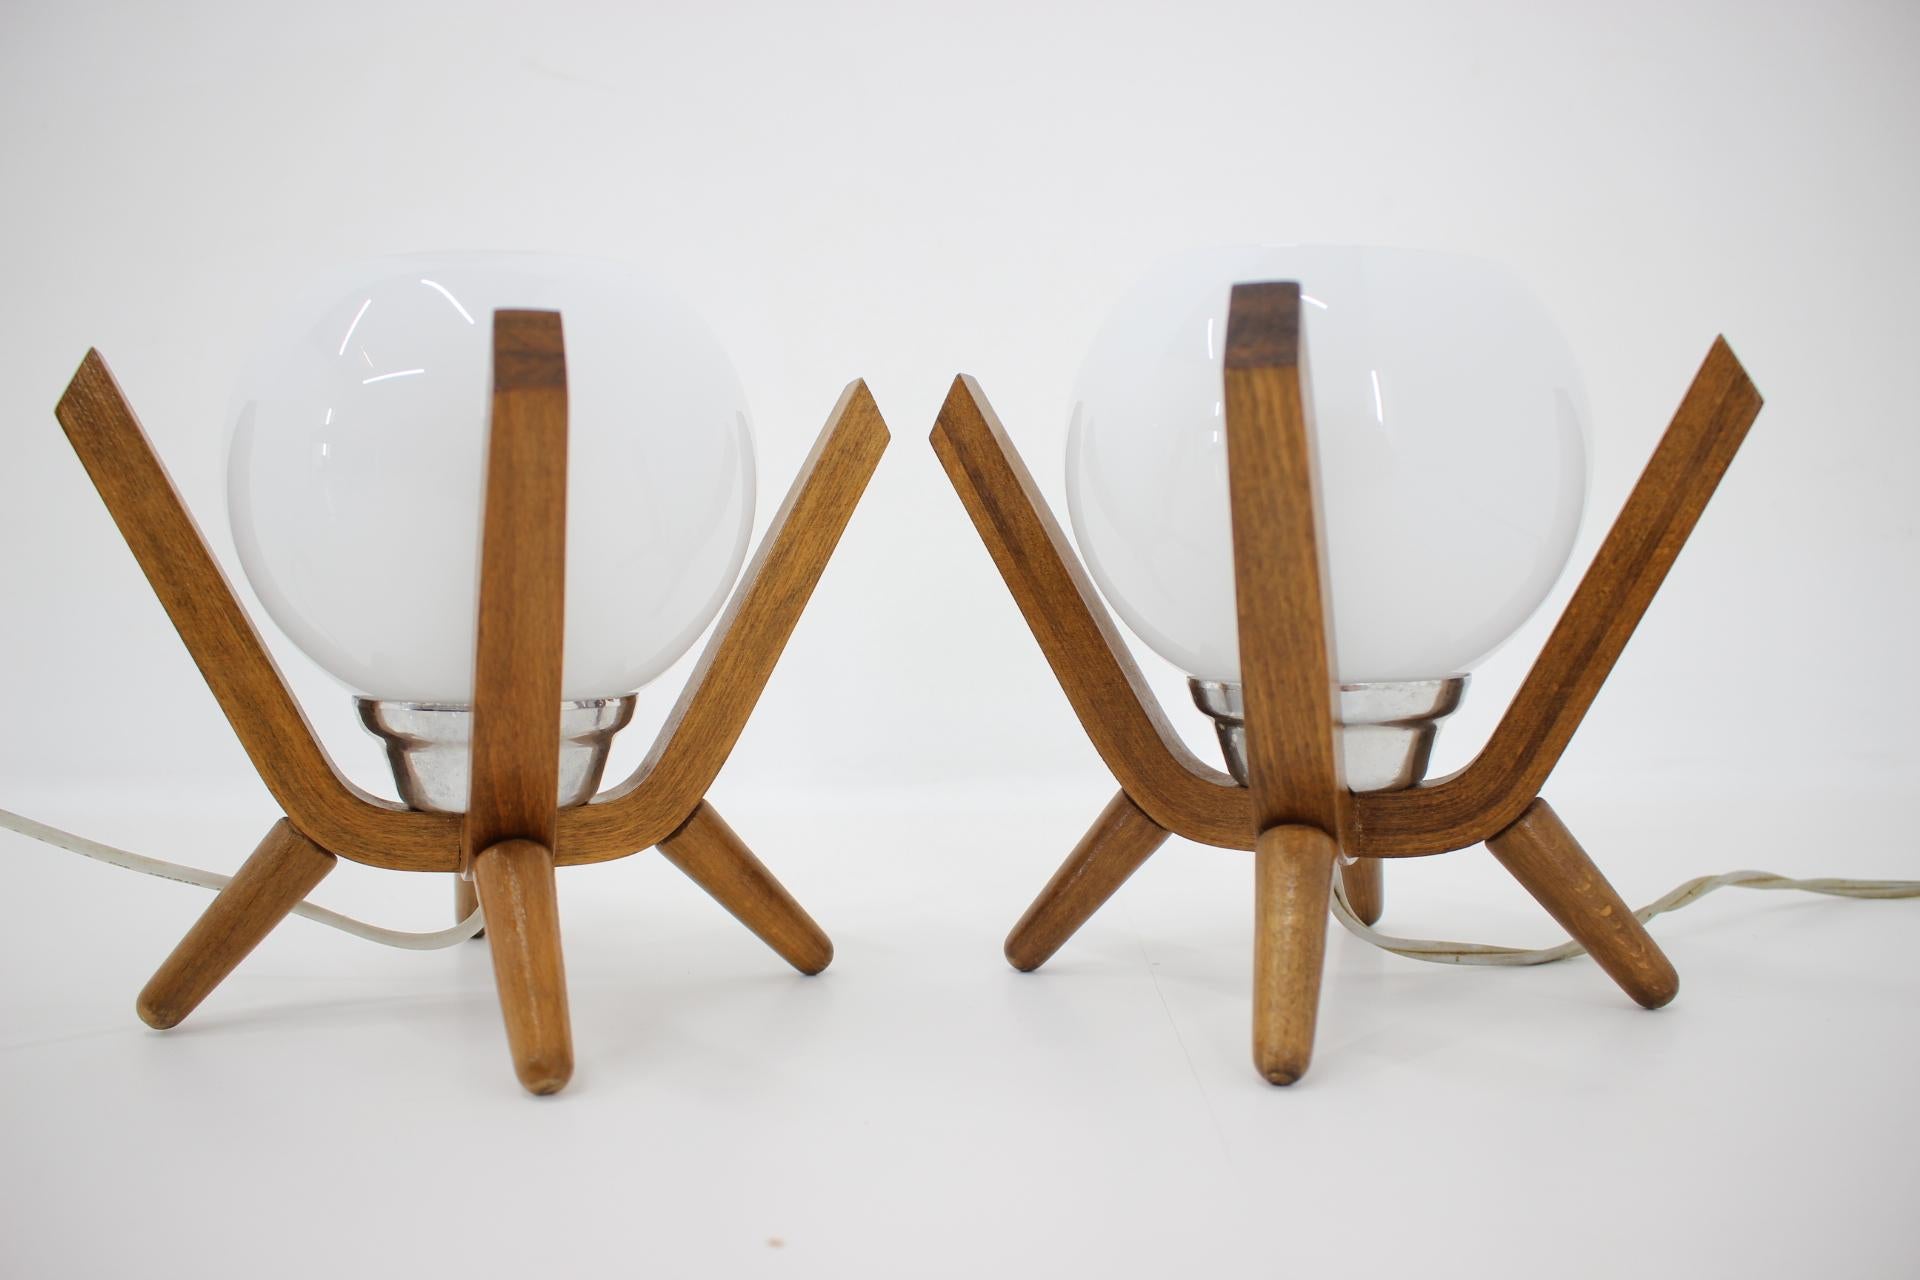 Czech Pair of Midcentury Wooden Design Table Lamps 